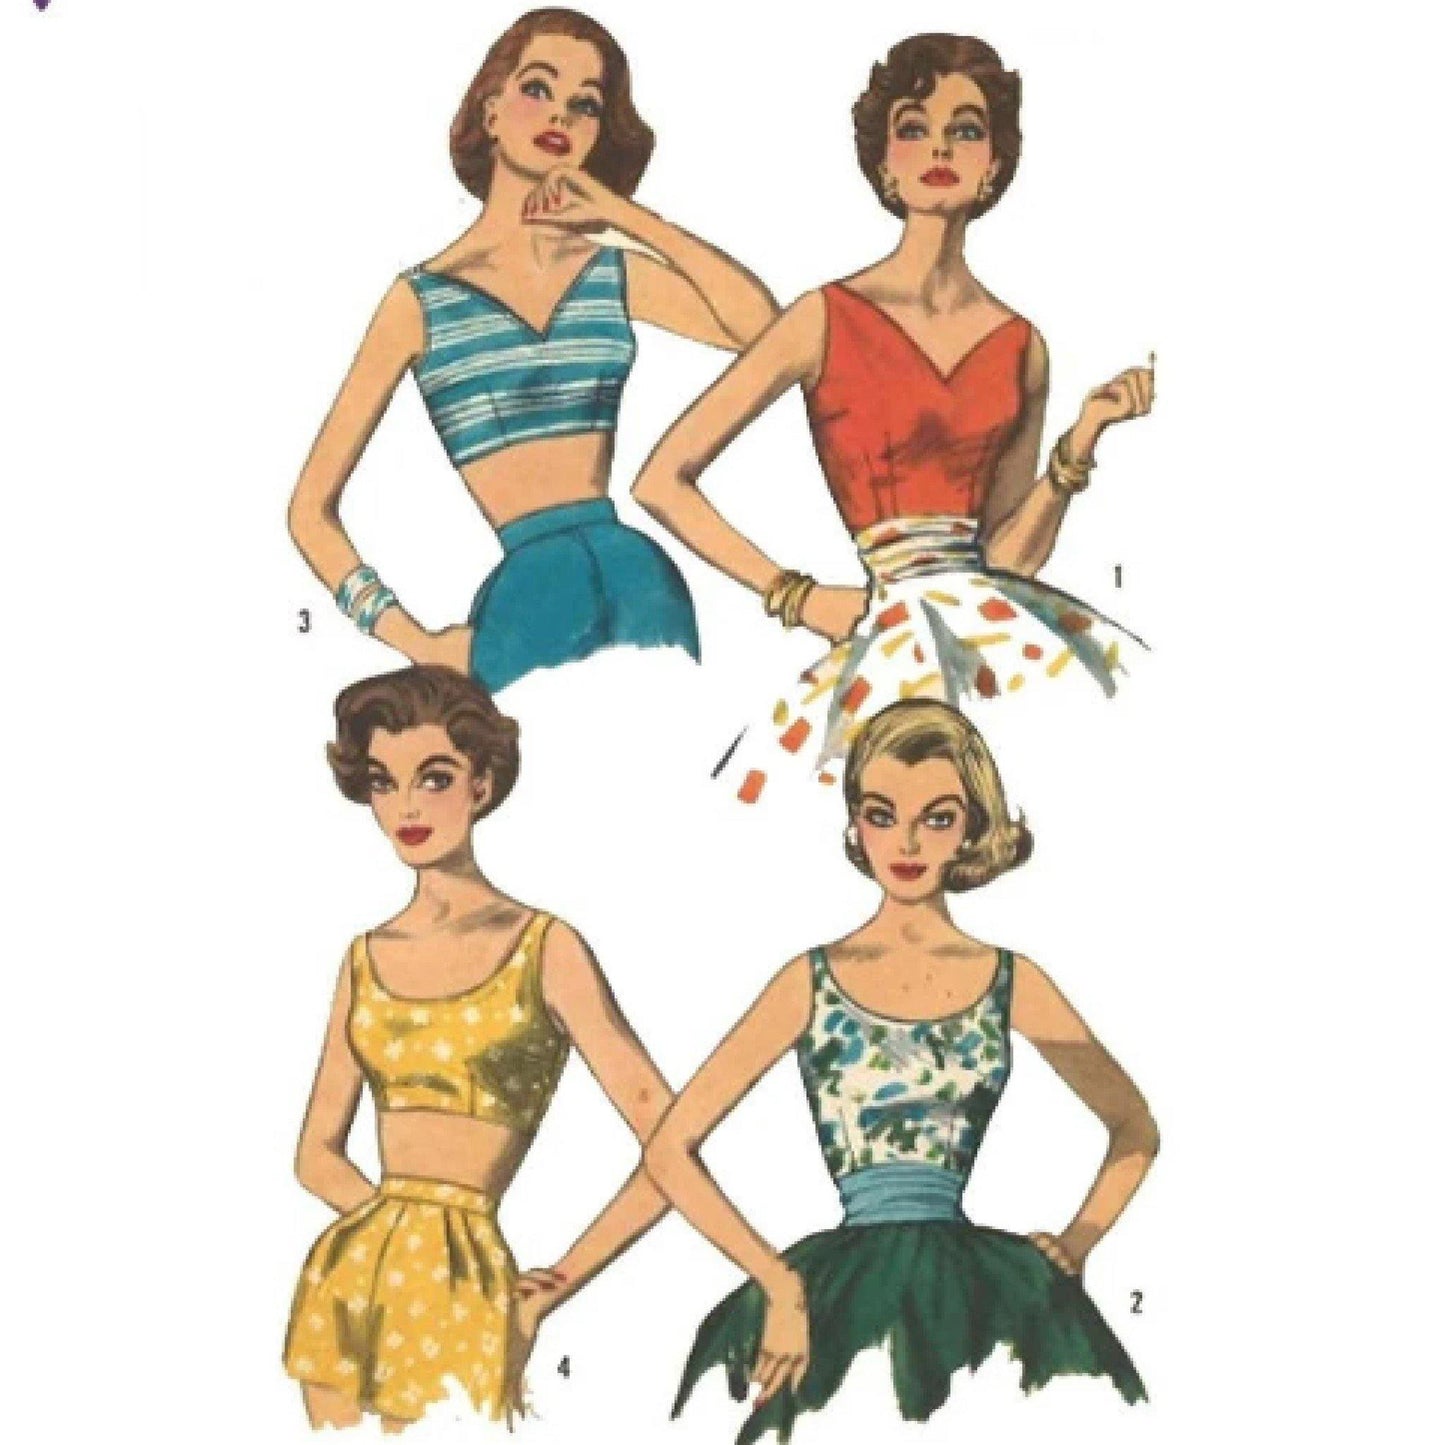 4 ladies in 4 versions of top made from one pattern. V neck or scooped neck and cropped or full length sleeveless and dart fitted, Combined with dart fitted shorts , full circle skirt or pedal pusher slacks